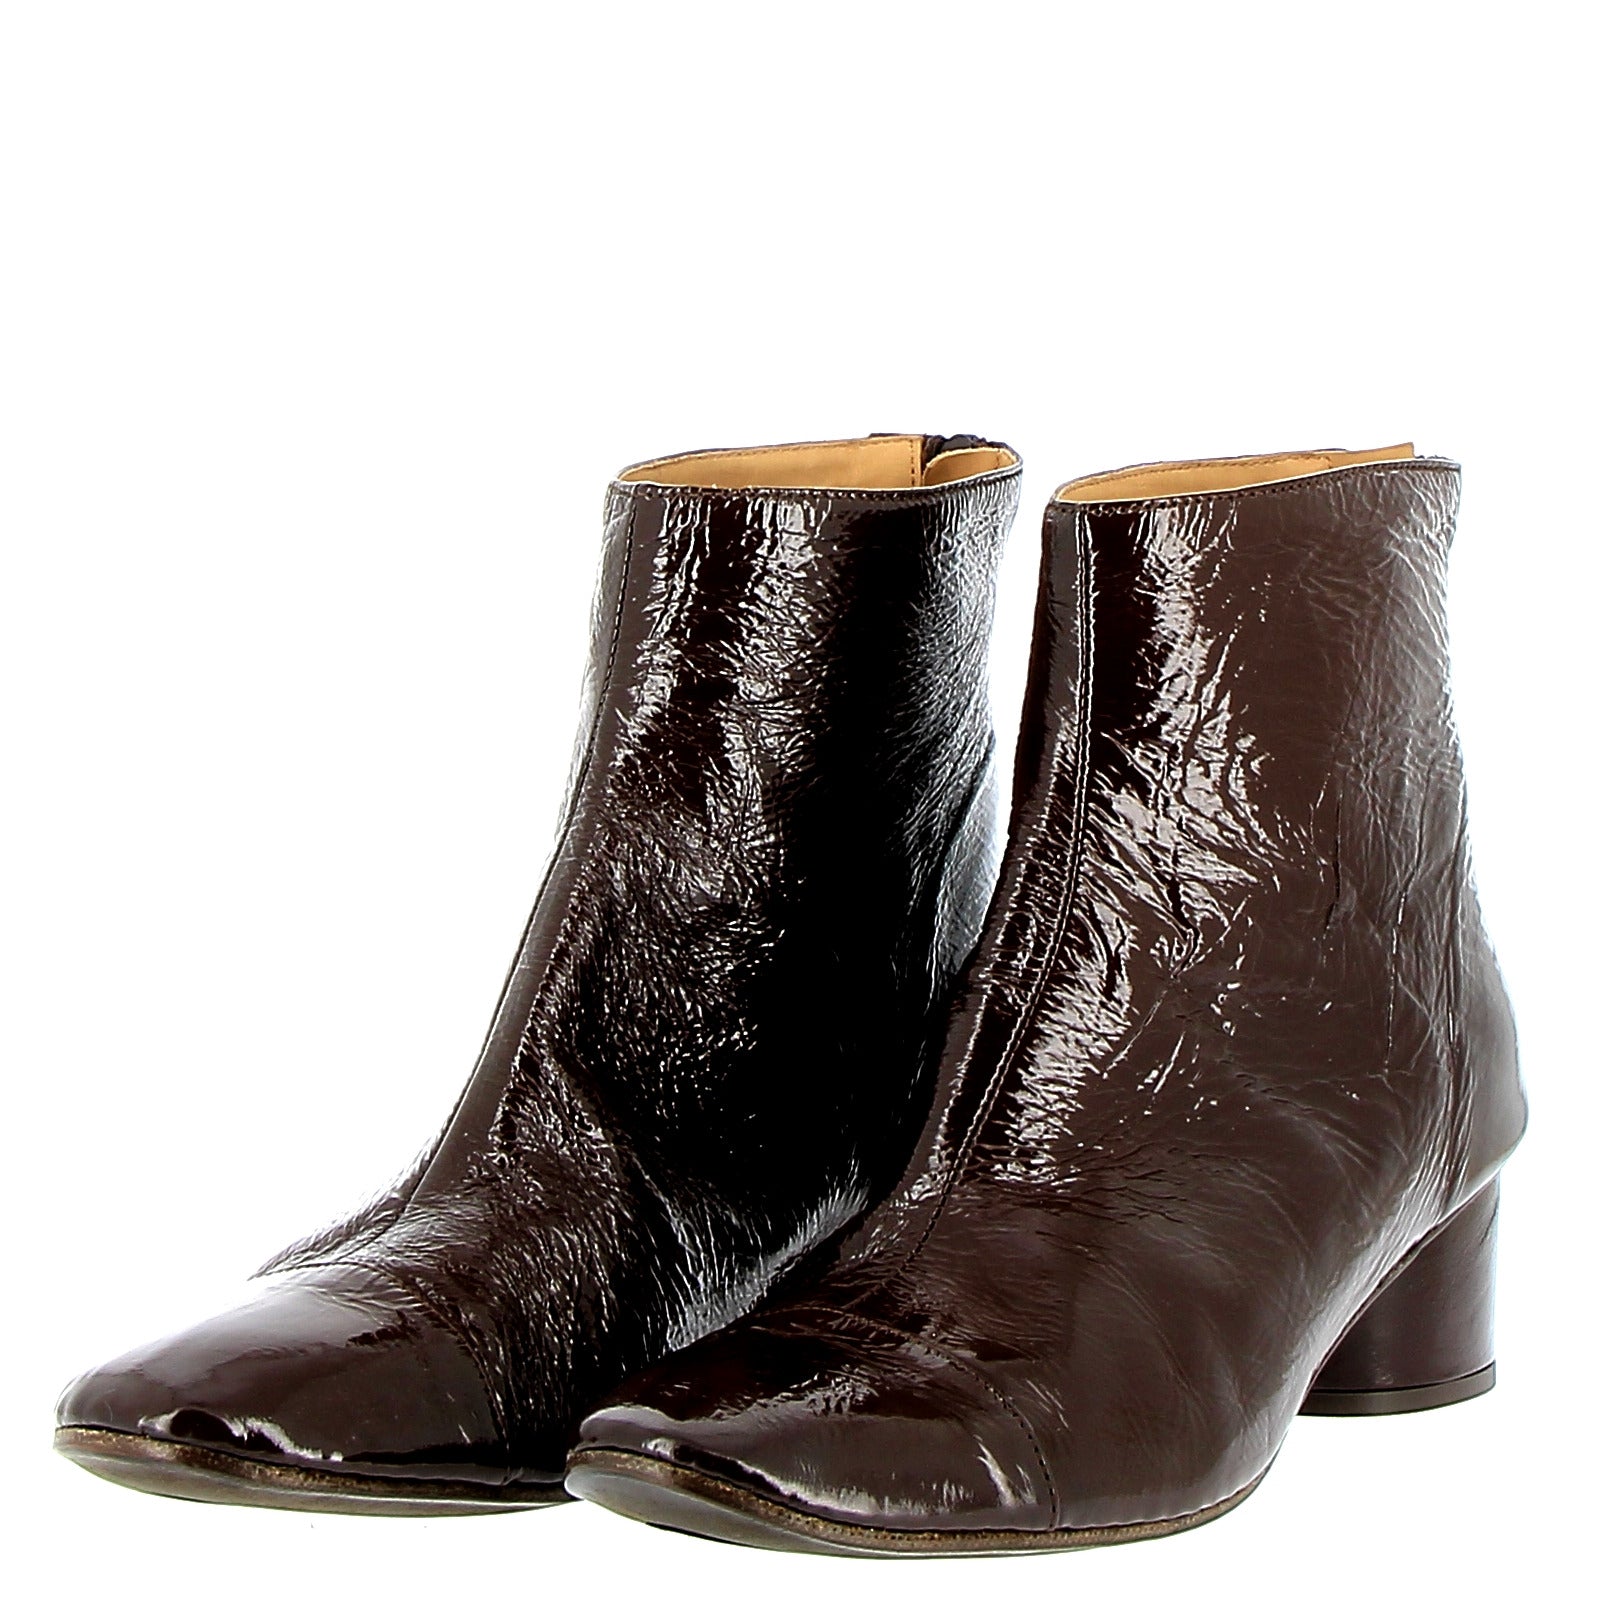 Ankle boot in Chocolate naplack